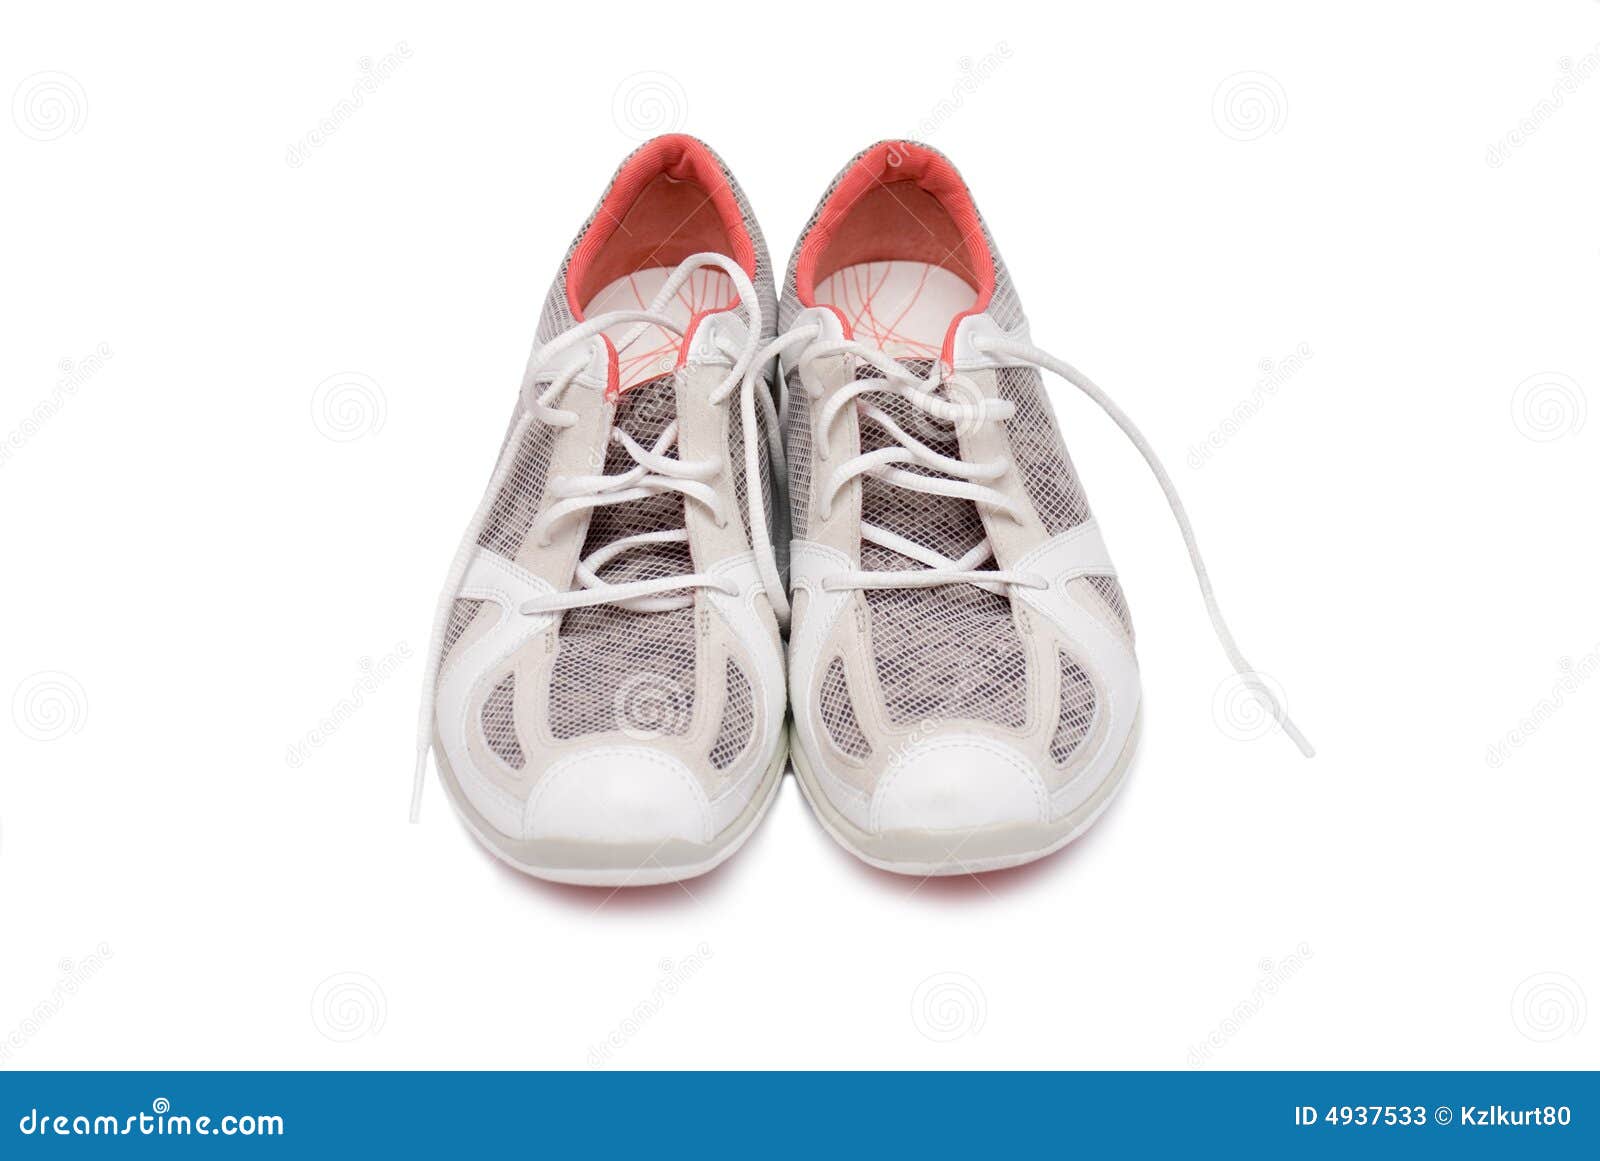 A Pair of Brand New Running Shoes Stock Image - Image of determination ...